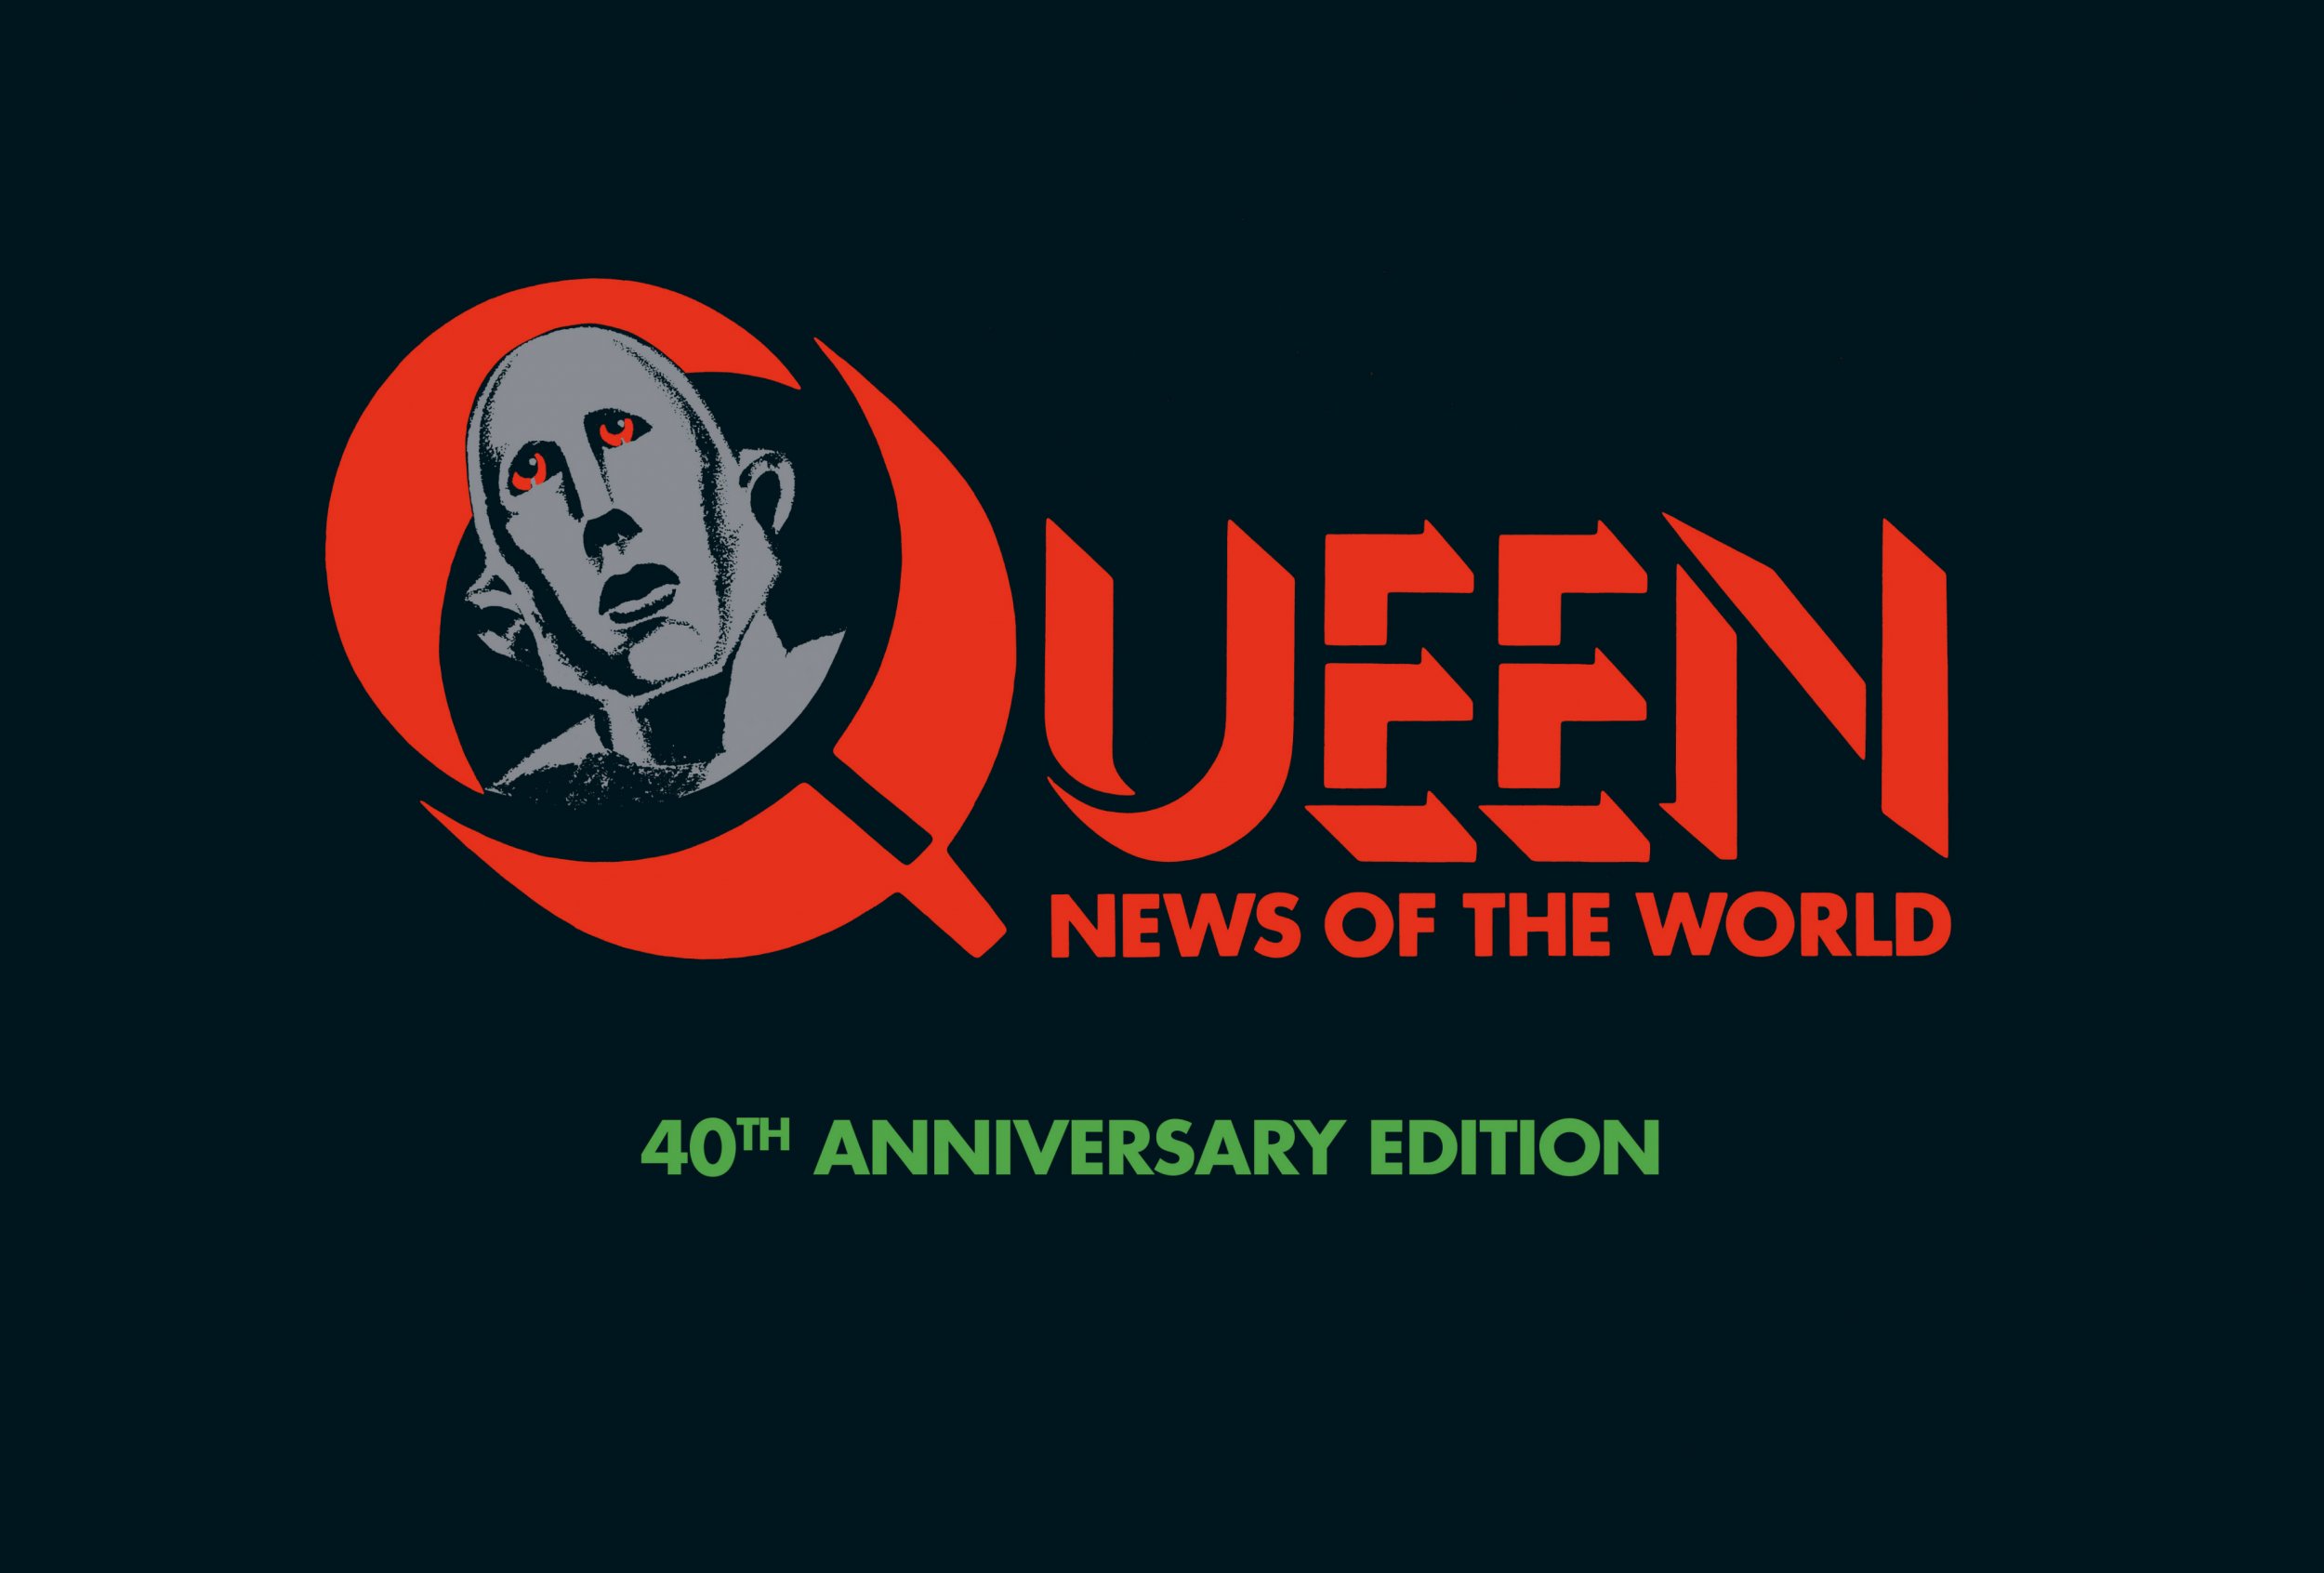 Queen - News of the World 40th anniversary